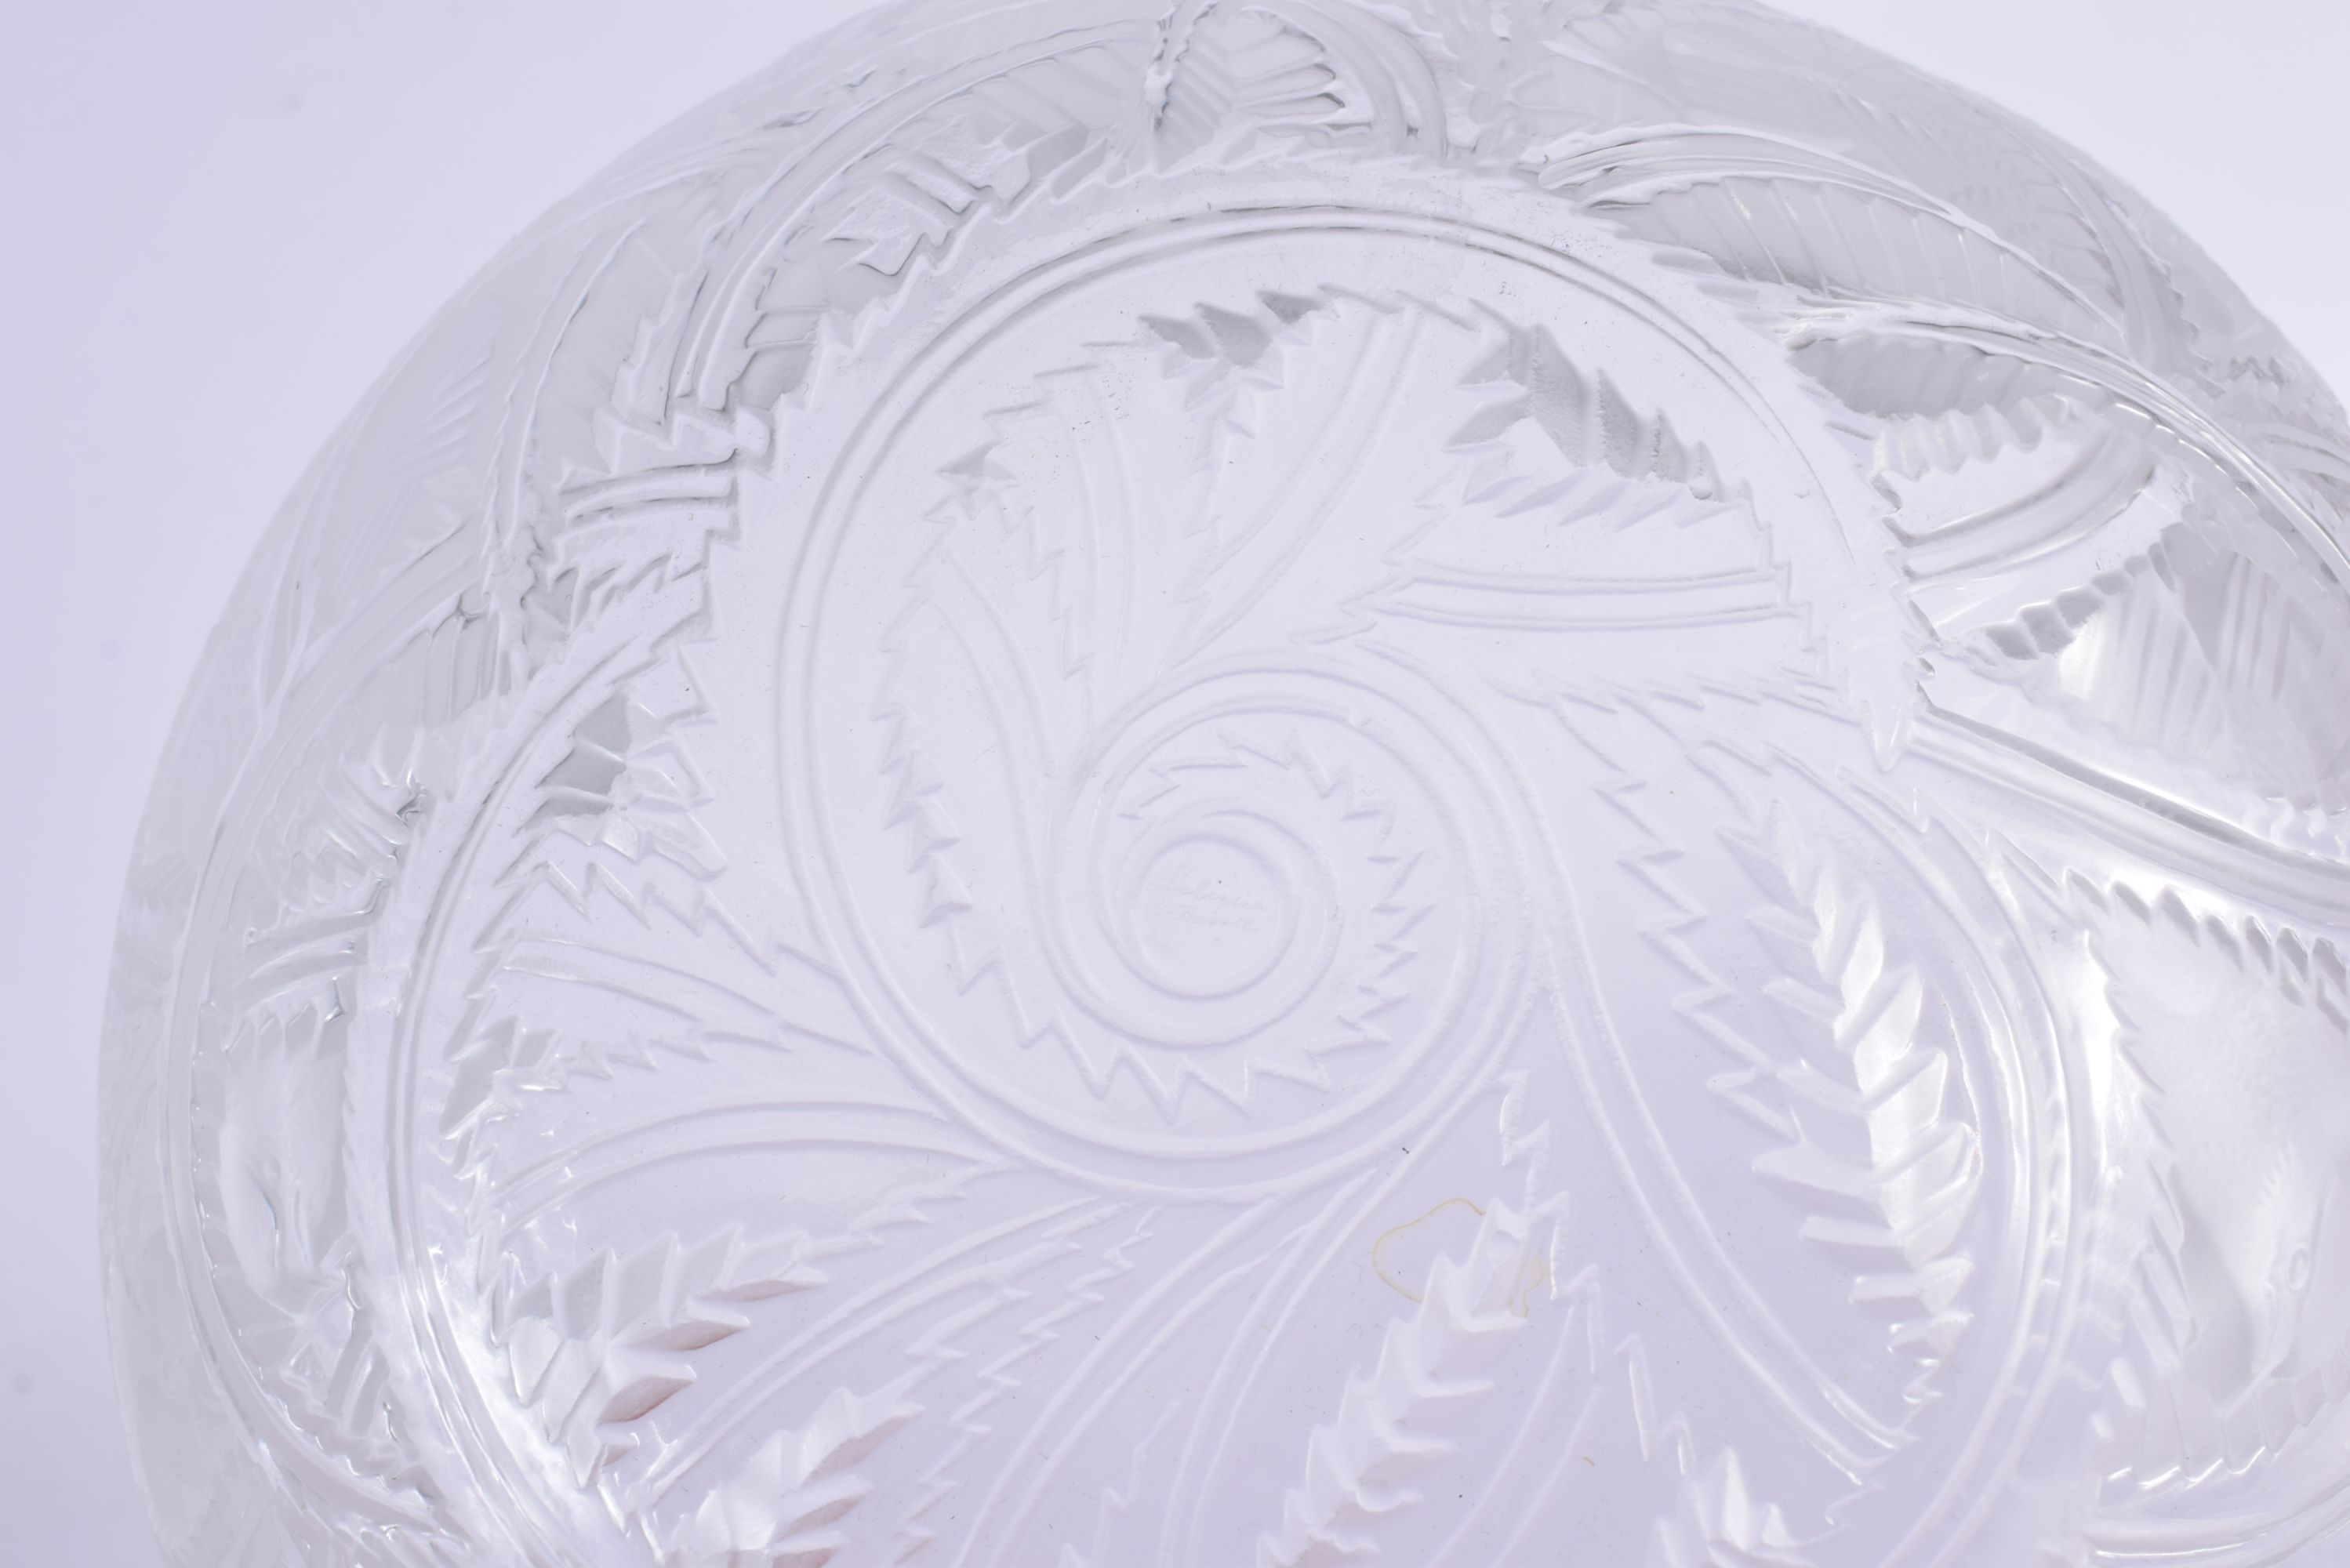 A LARGE FRENCH LALIQUE GLASS VASE decorated with birds and foliage. 22 cm x 10 cm. - Image 5 of 6